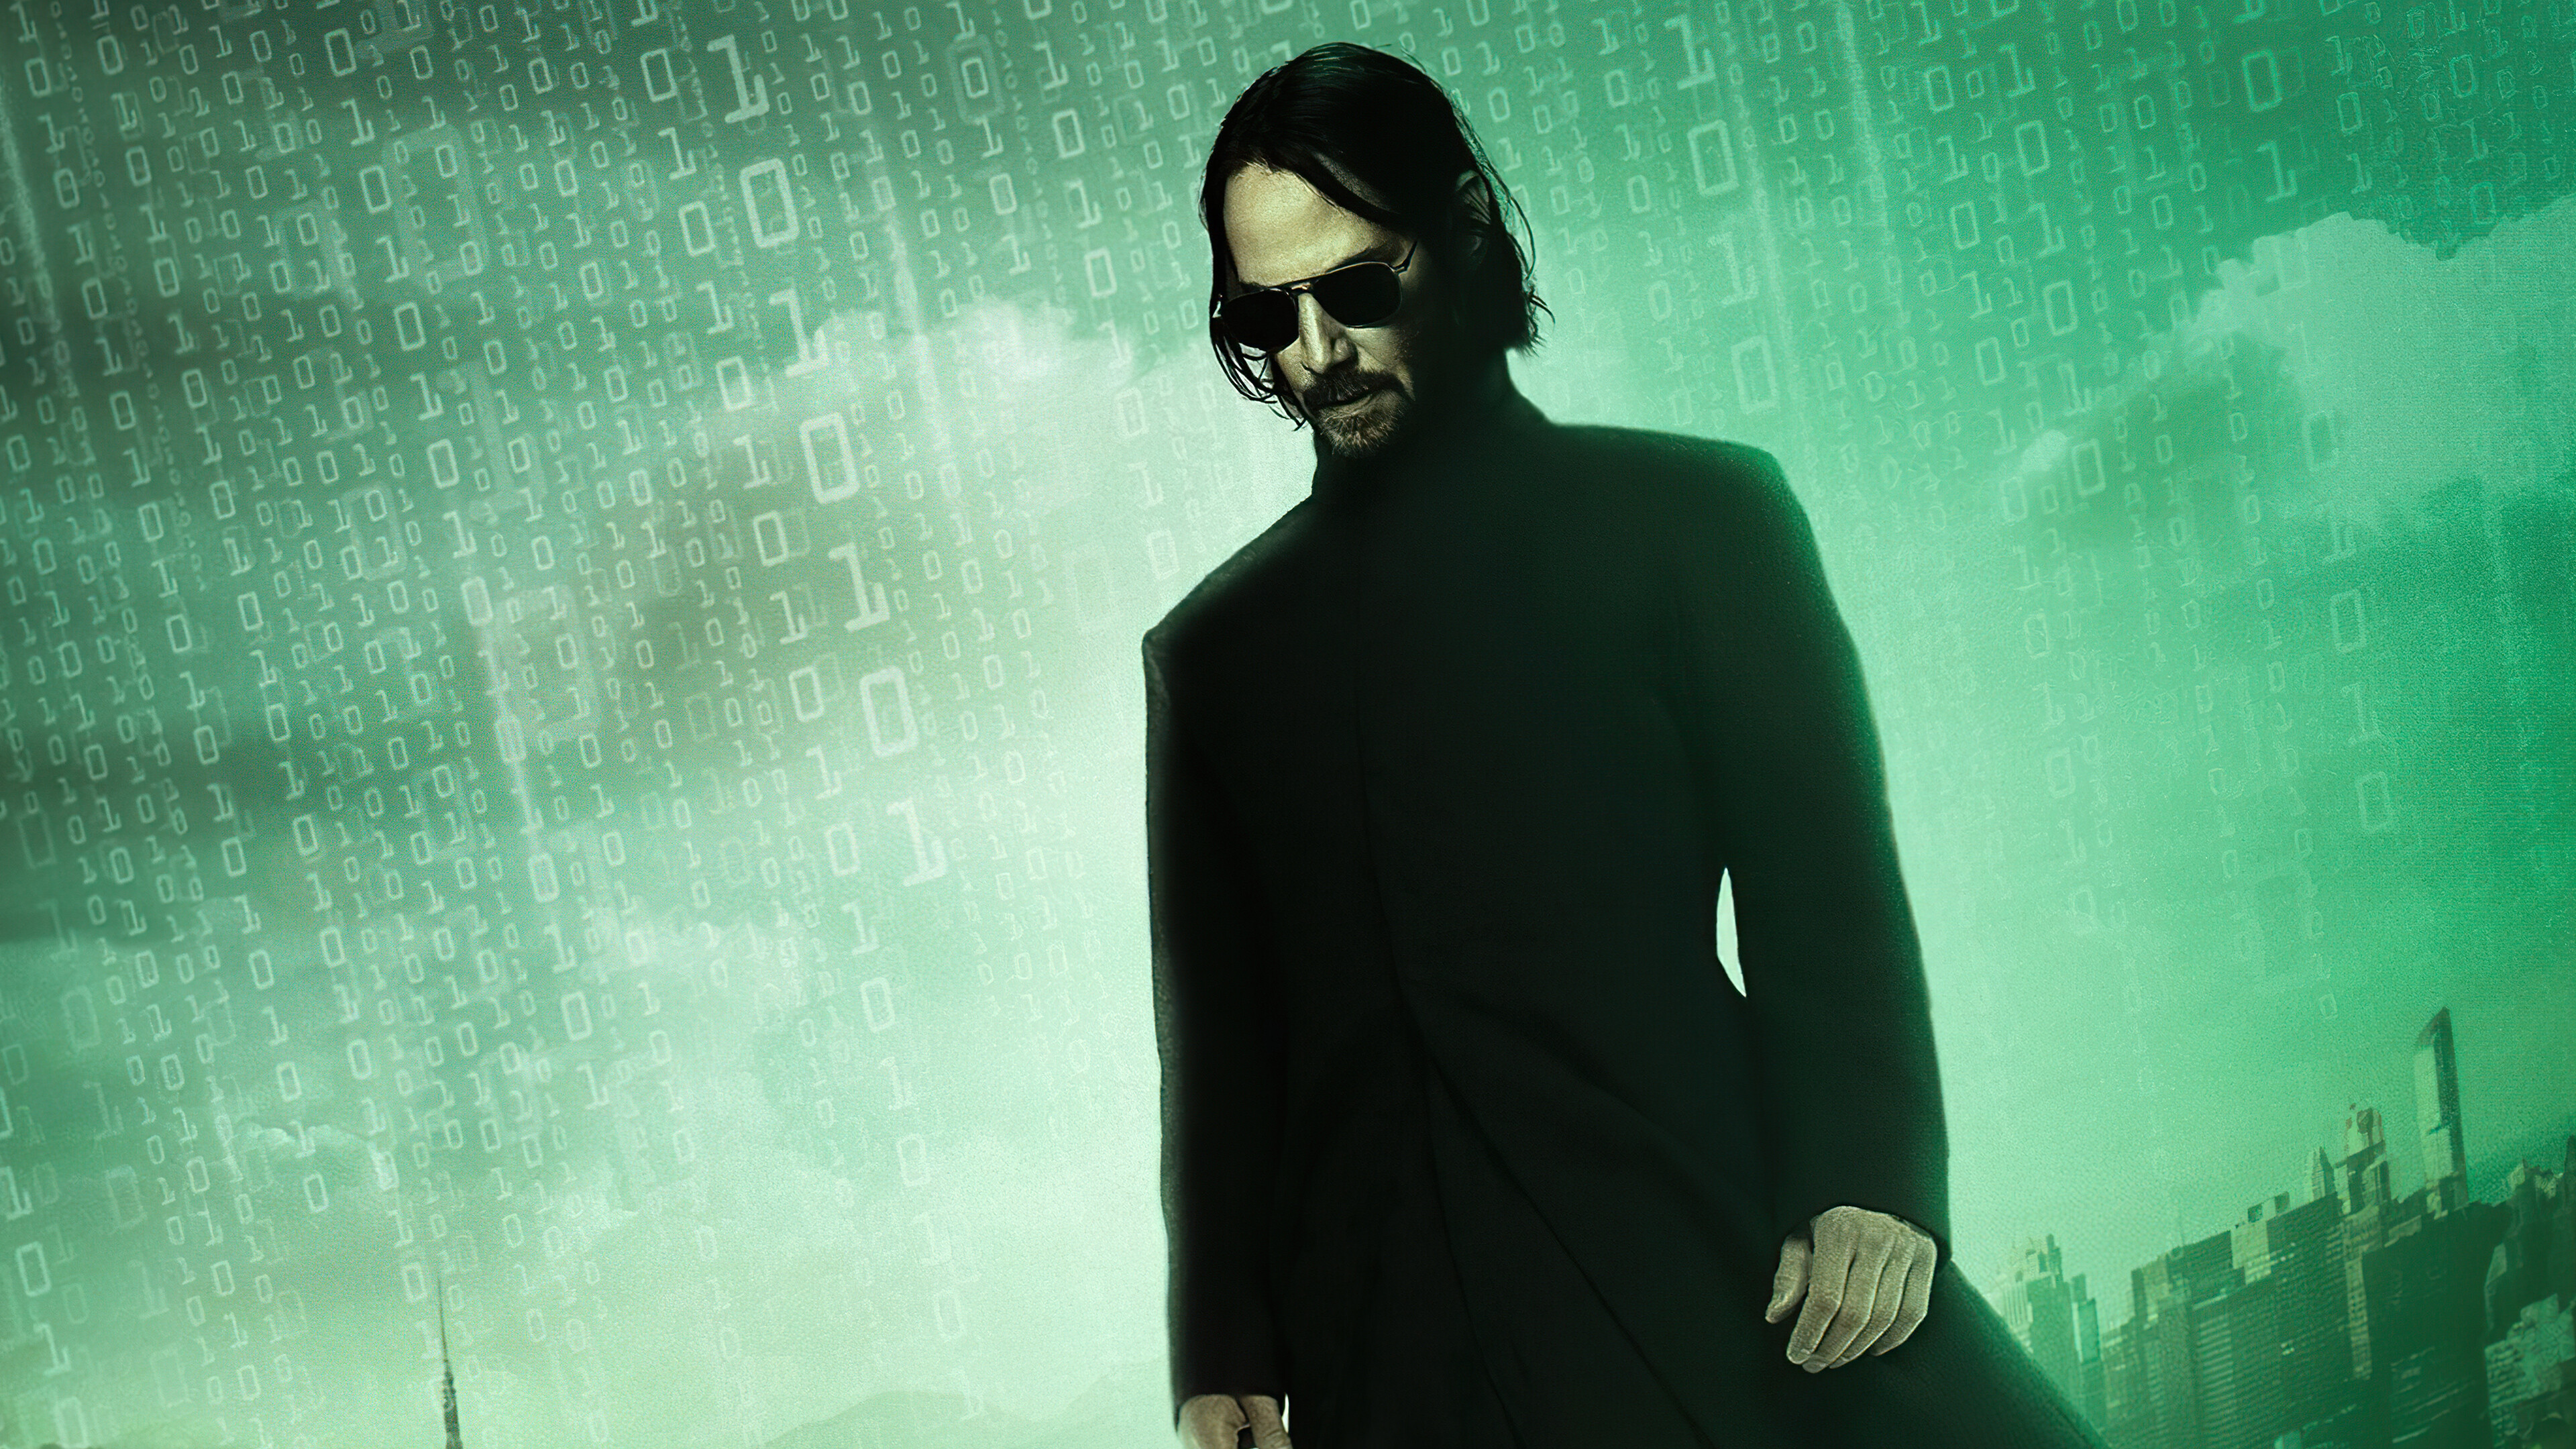 Matrix Franchise: Neo, Portrayed as a cybercriminal and computer programmer by Keanu Reeves. 3840x2160 4K Wallpaper.